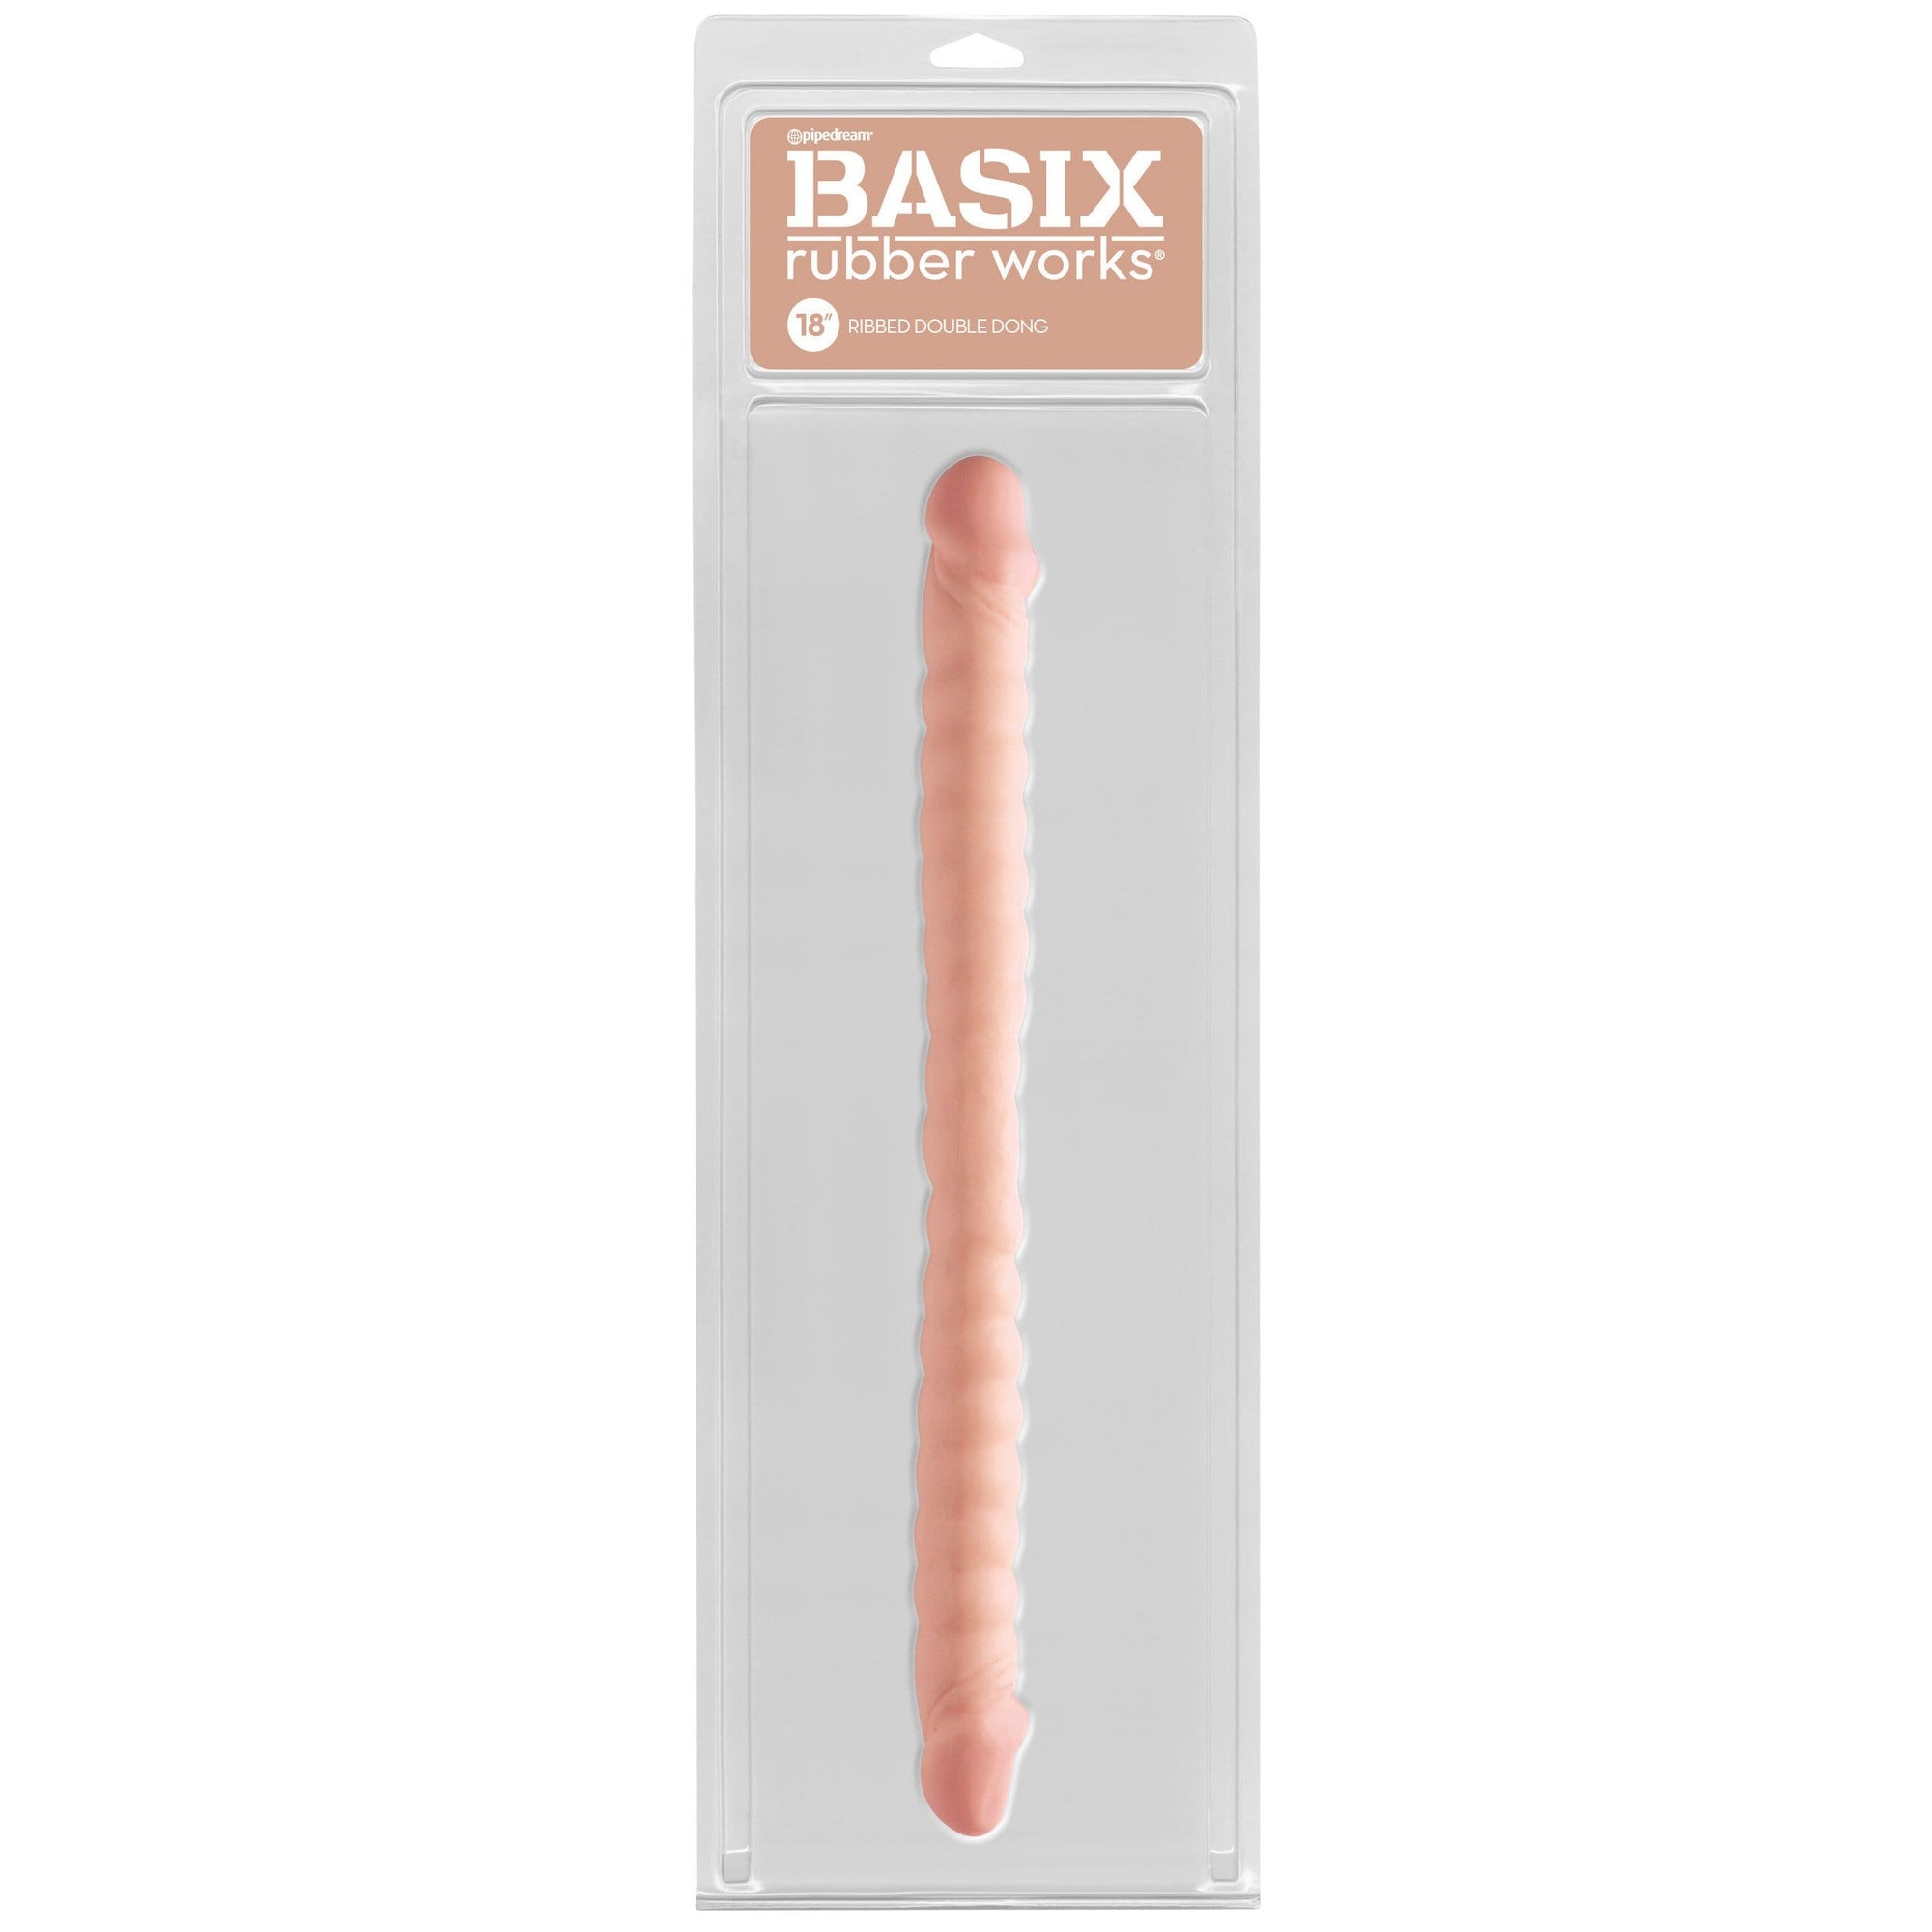 Pipedream - Basix Rubber Works Ribbed Double Dong 18" (Beige) -  Double Dildo (Non Vibration)  Durio.sg